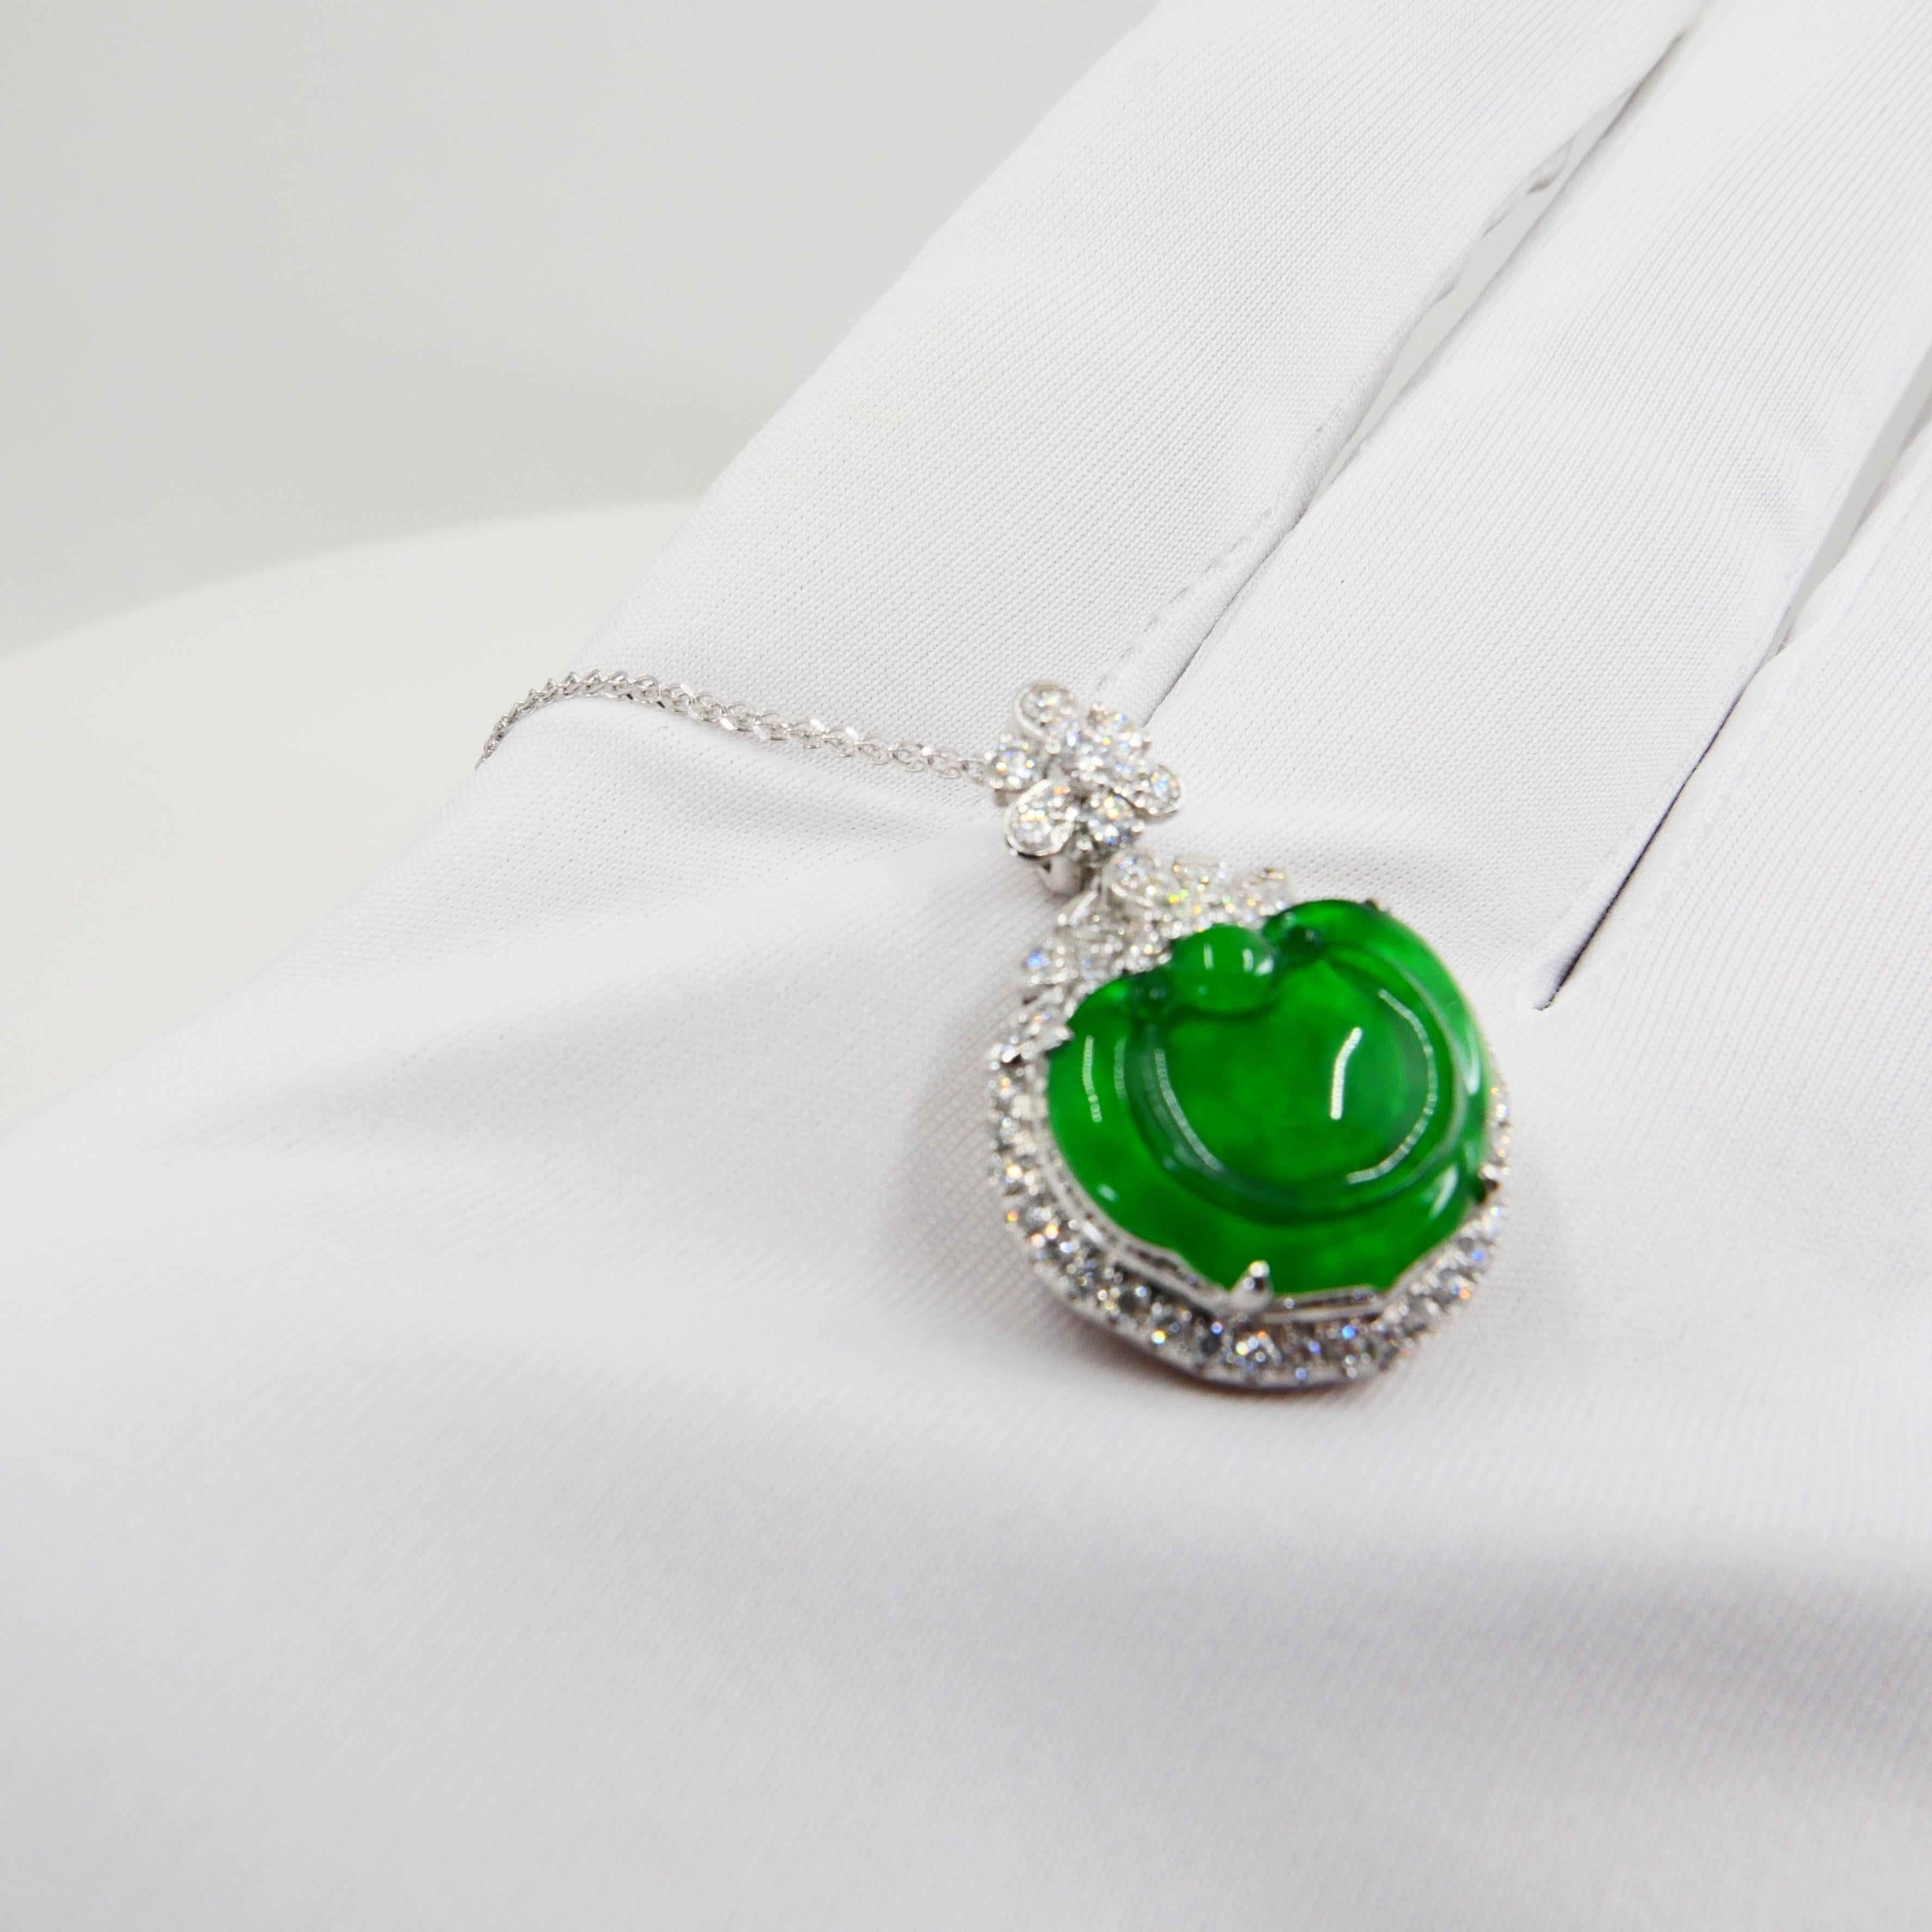 Certified Type A Icy Jade & Diamond Pendant Necklace, Glowing Apple Green Color For Sale 5